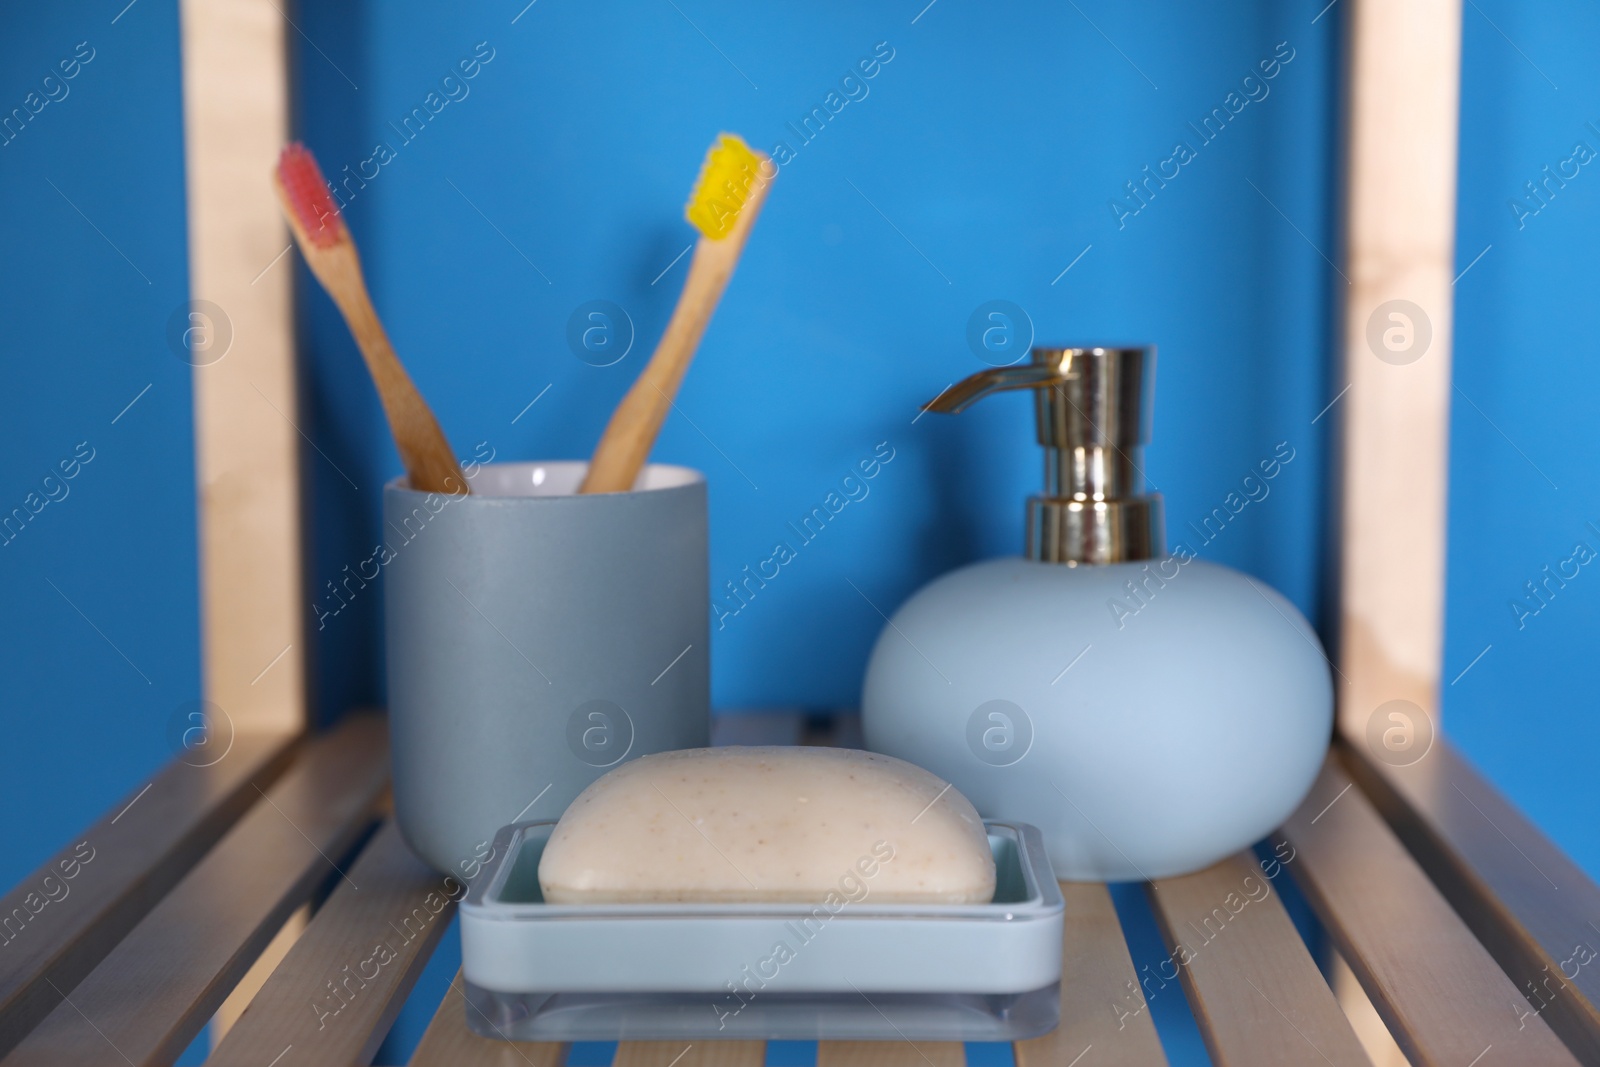 Photo of Shelving unit with toiletries near blue wall indoors. Bathroom interior element